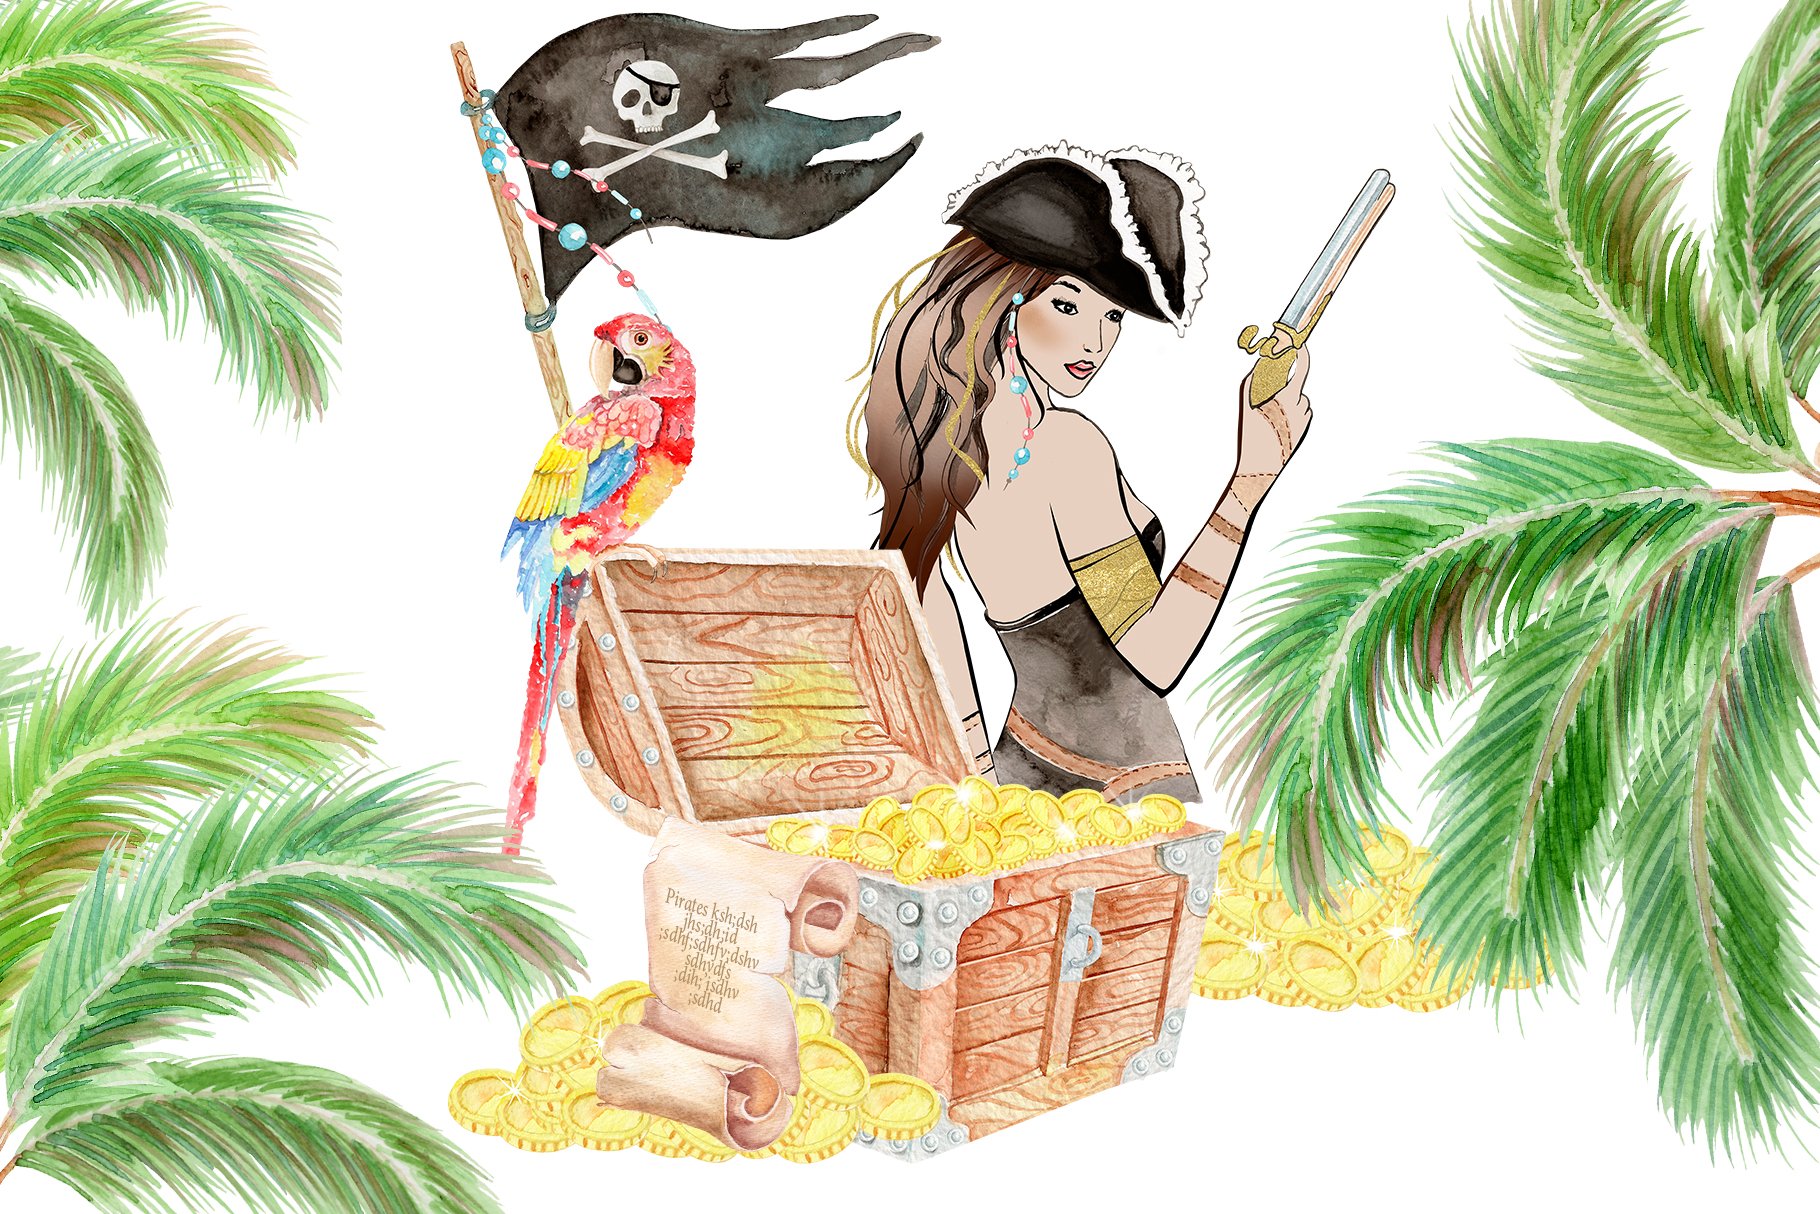 High quality watercolor pirate illustration with a parrot, women and gold.